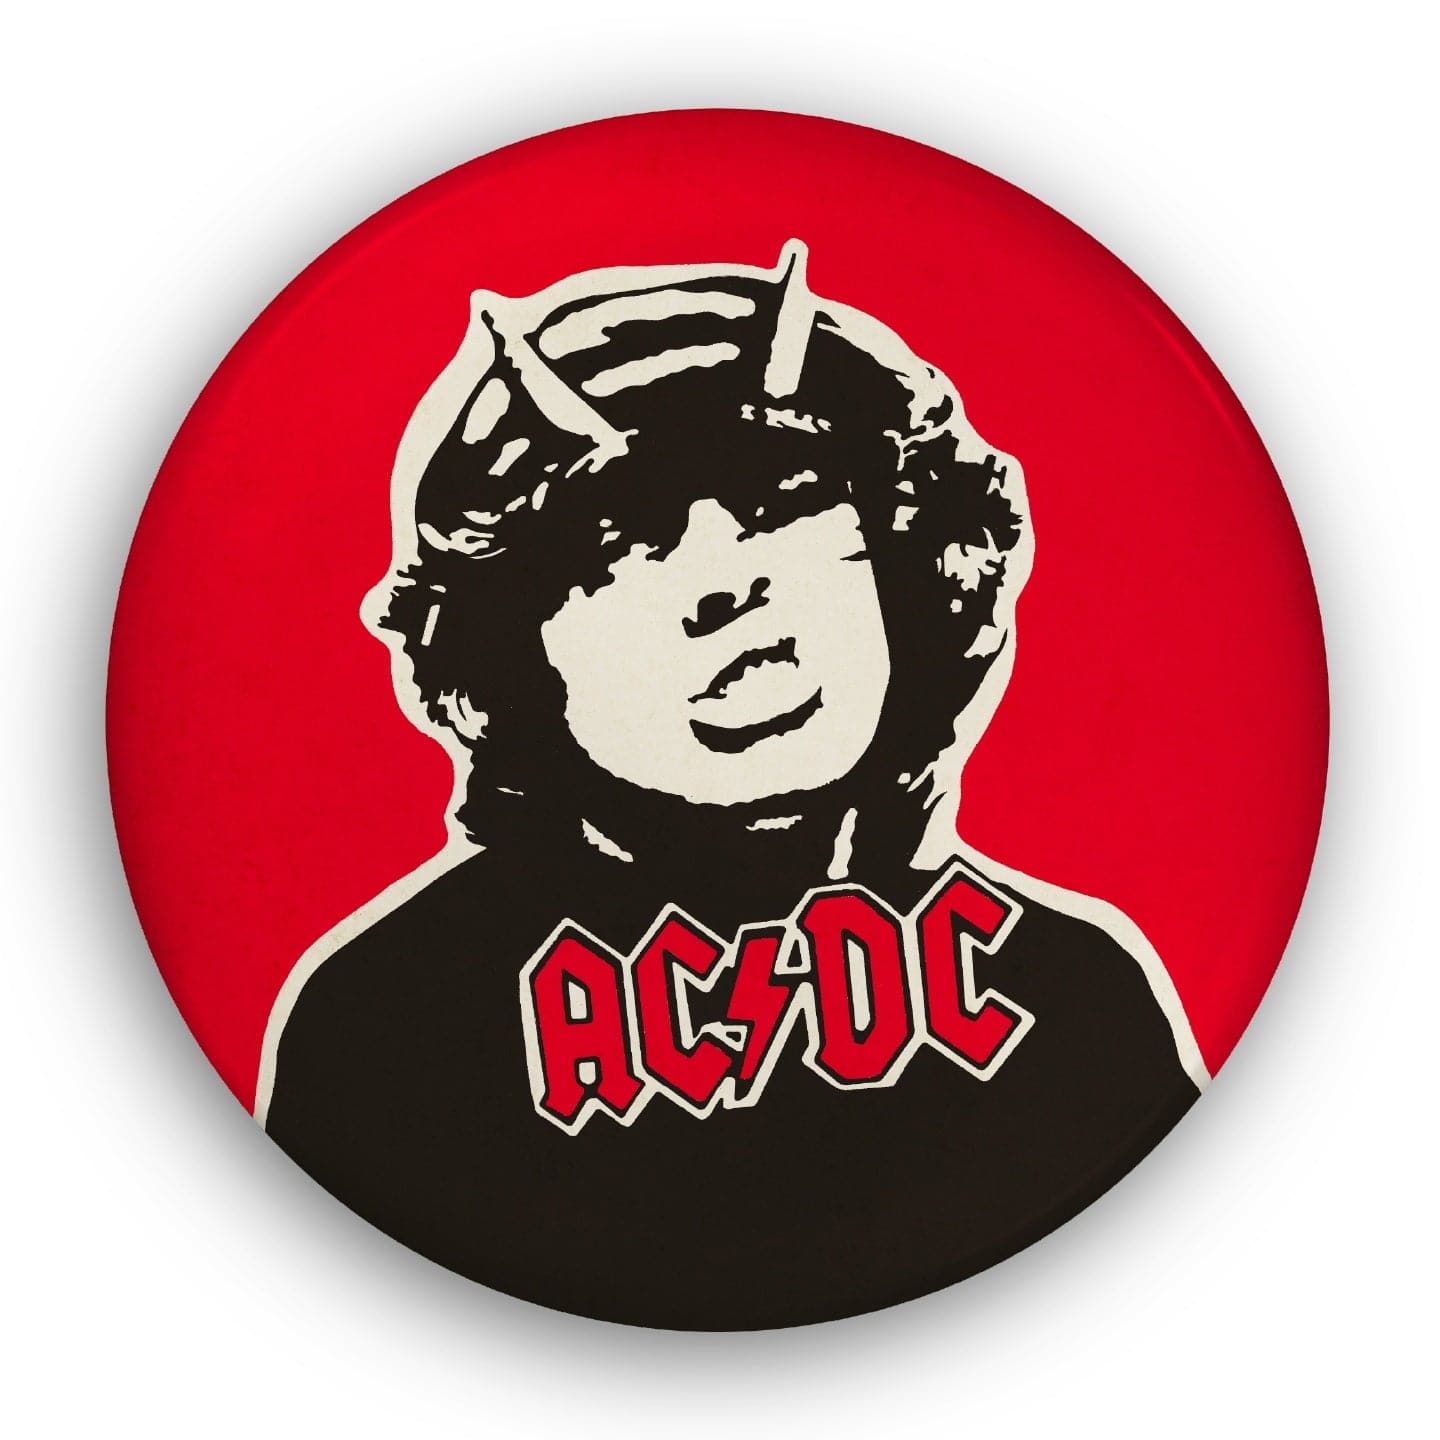 Image of AC/DC, Giant 3D Vintage Pin Badge artwork by Tony Dennis aka Tape Deck Art, free delivery